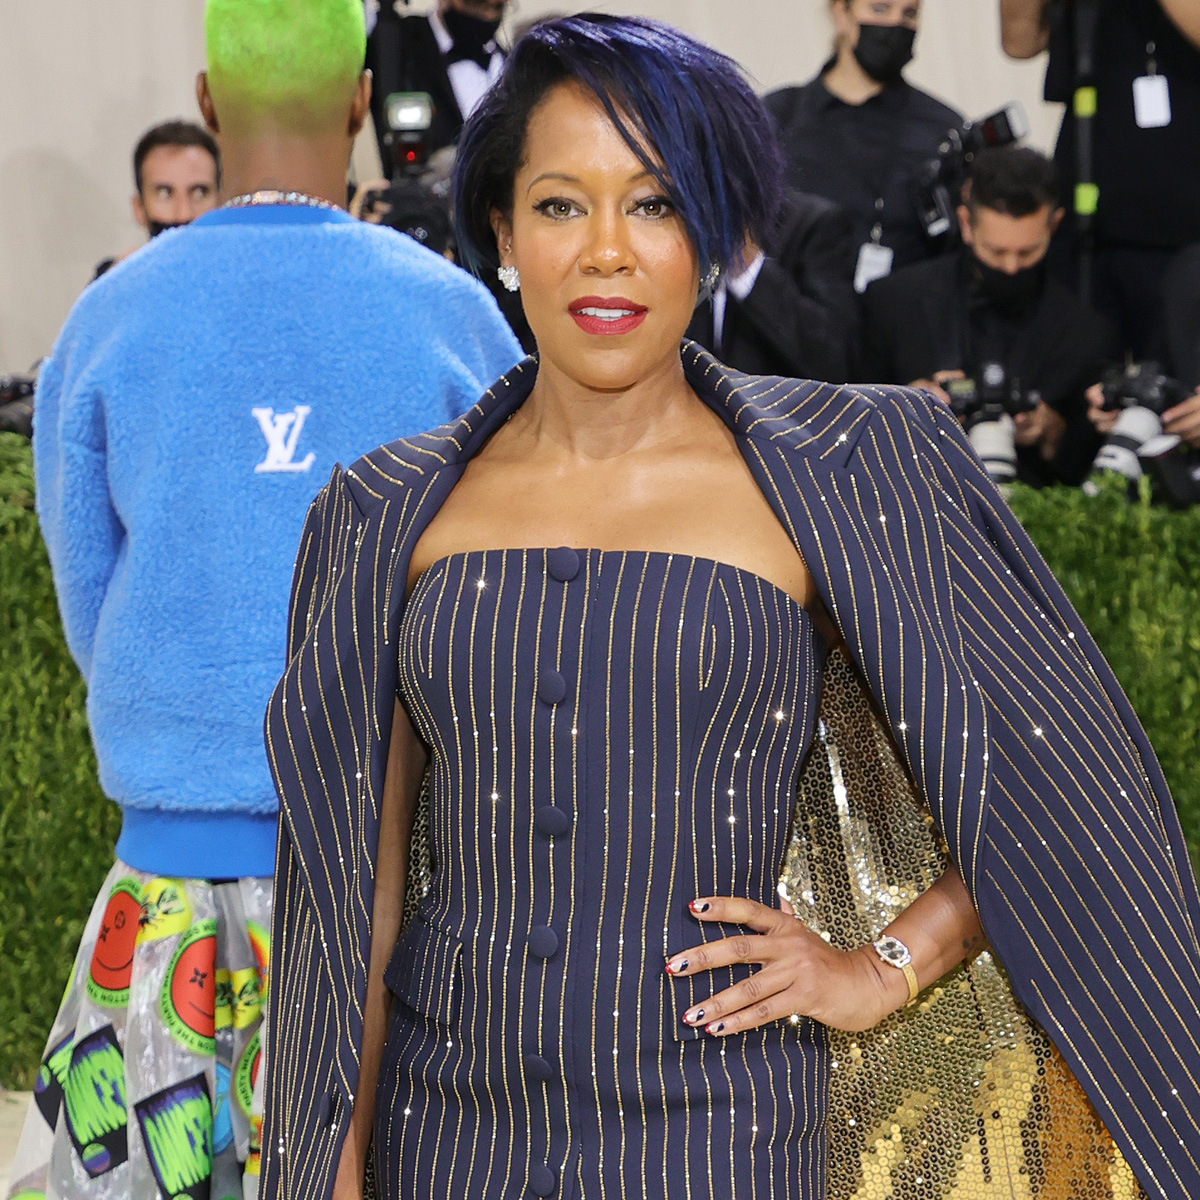 Regina King stuns in plunging butterfly gown at Oscars 2021